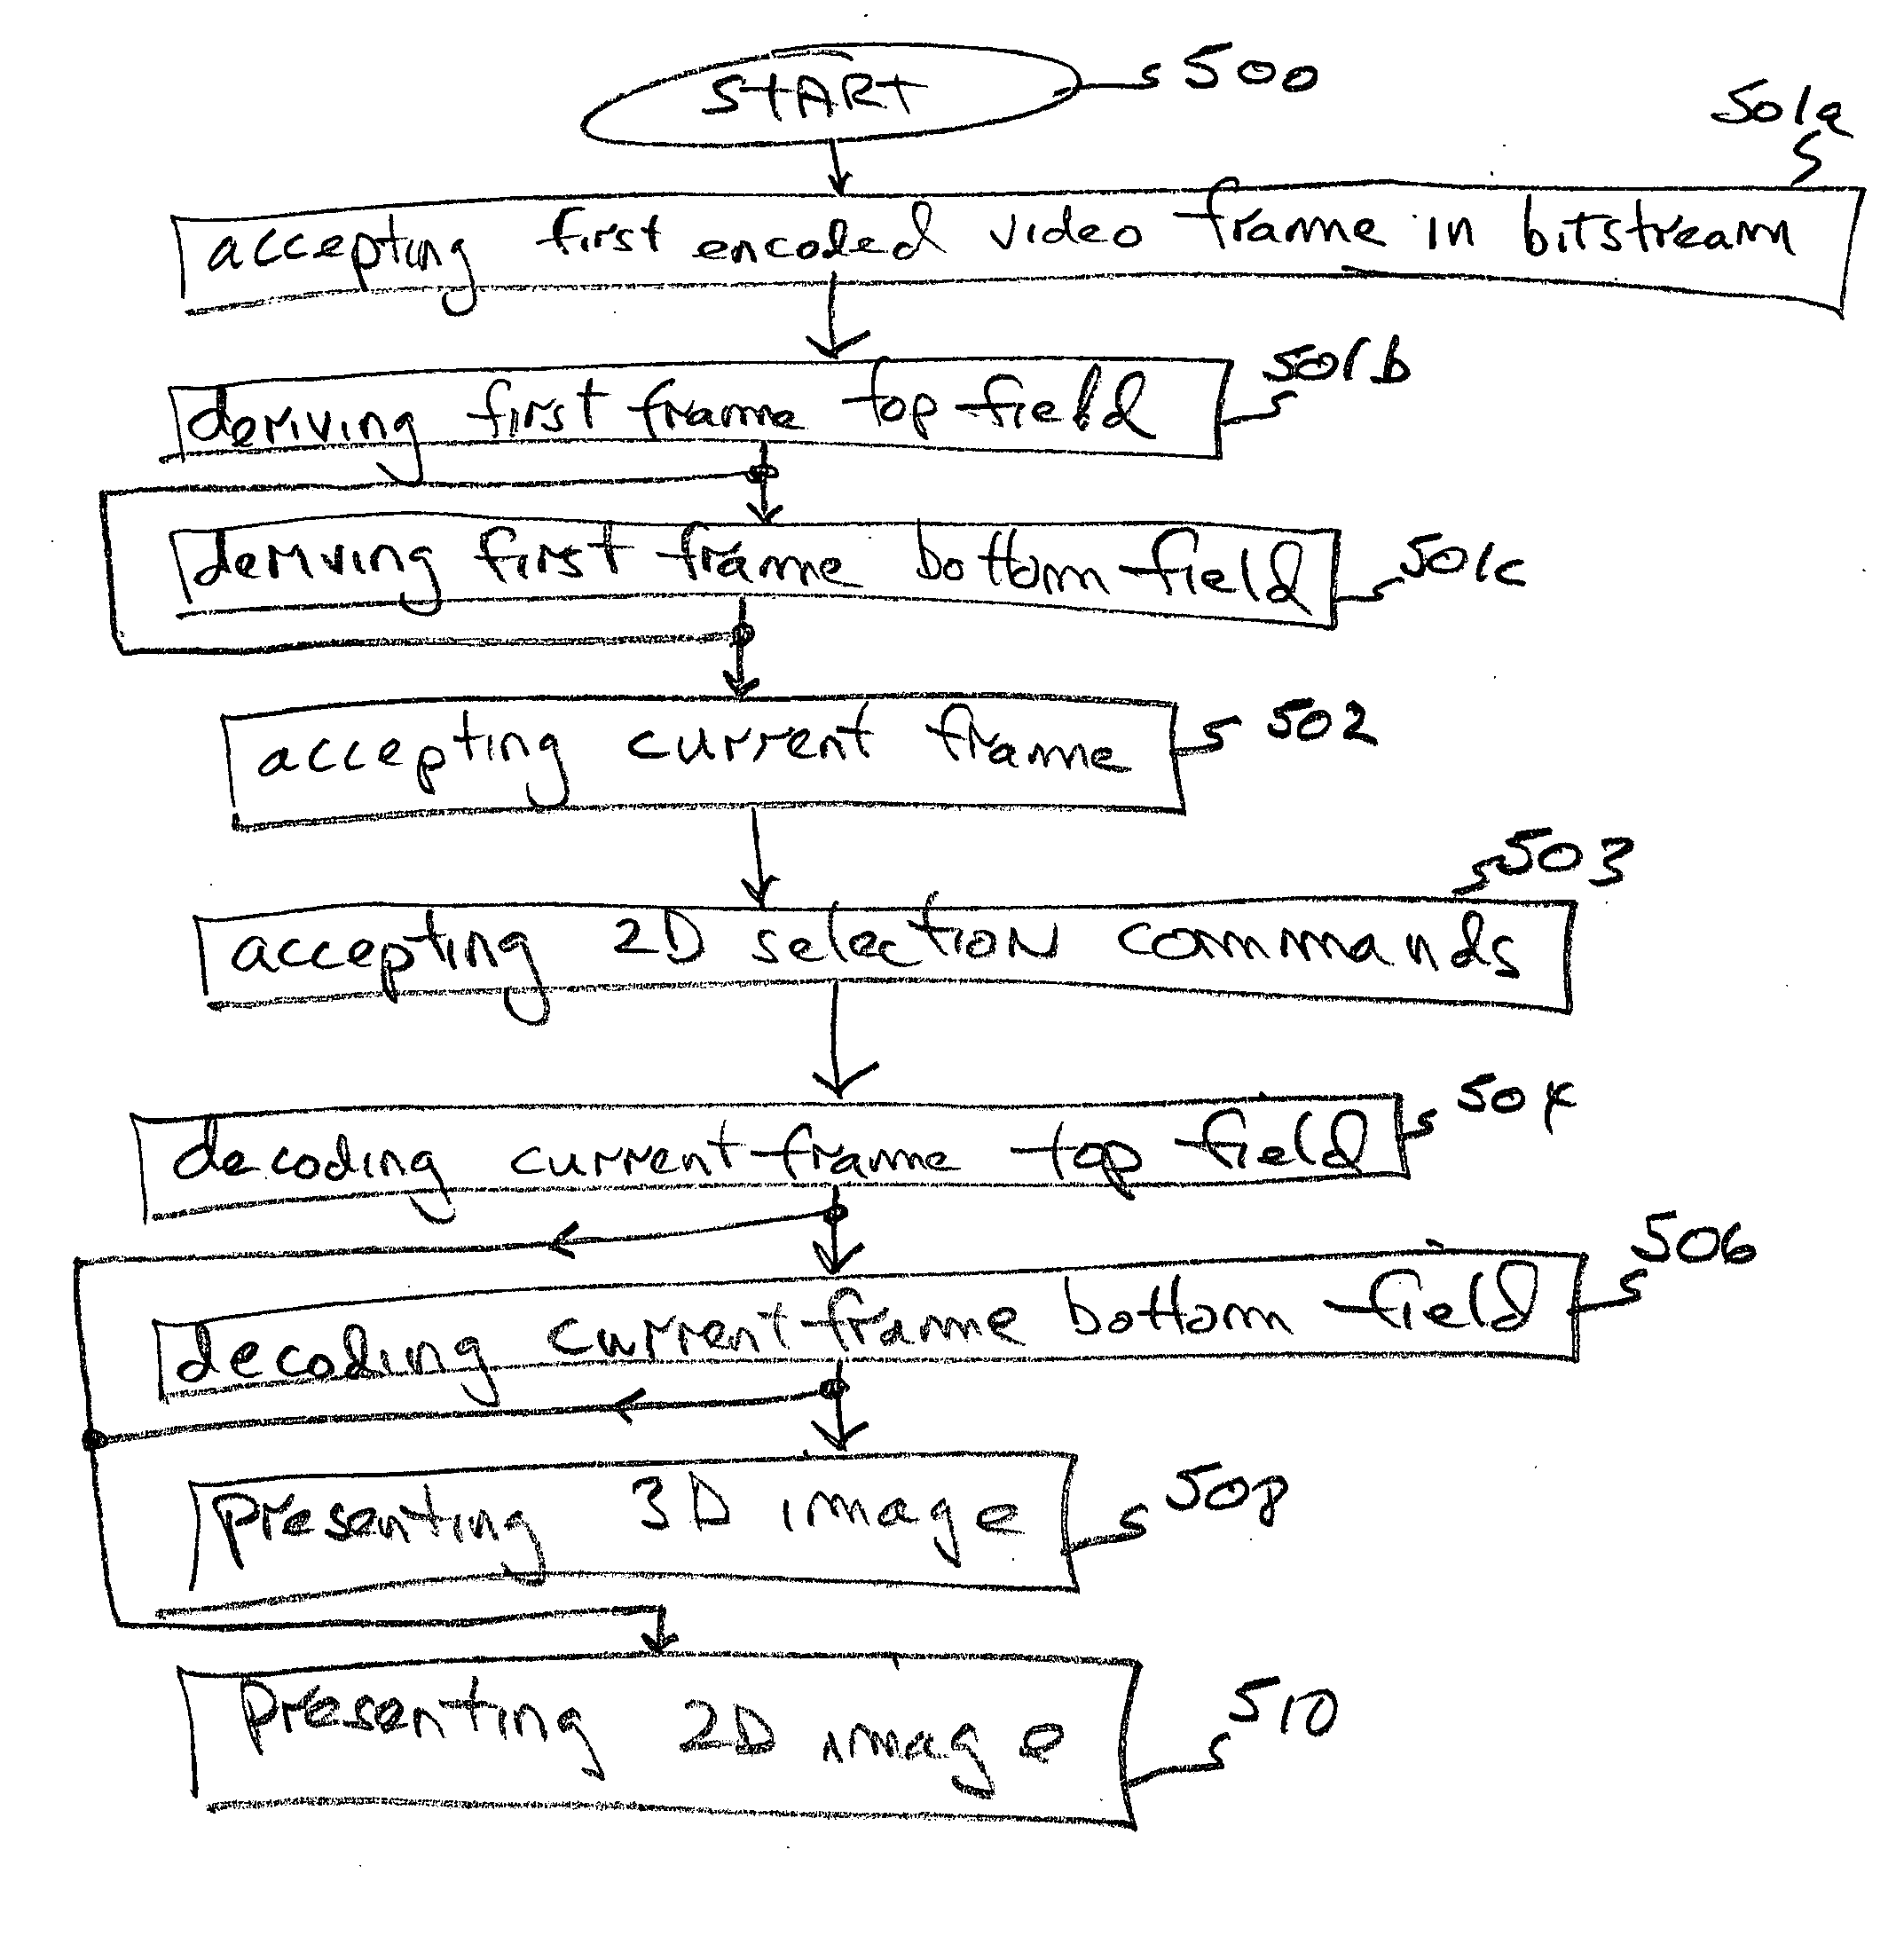 System and method for three-dimensional video coding